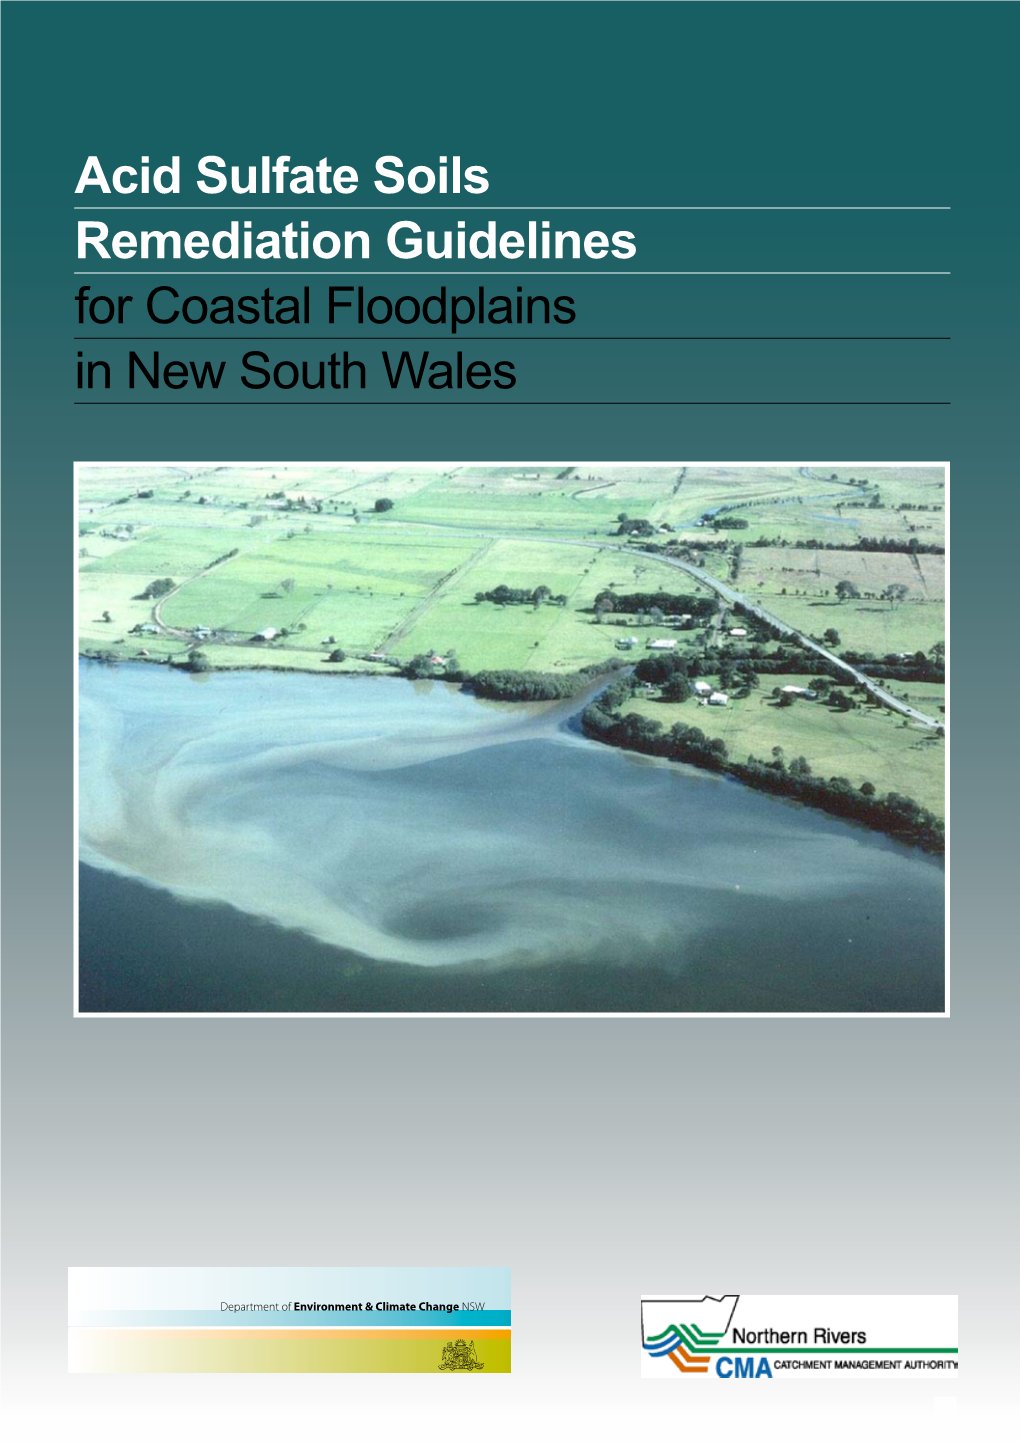 Acid Sulfate Soils Remediation Guidelines for Coastal Floodplains in New South Wales